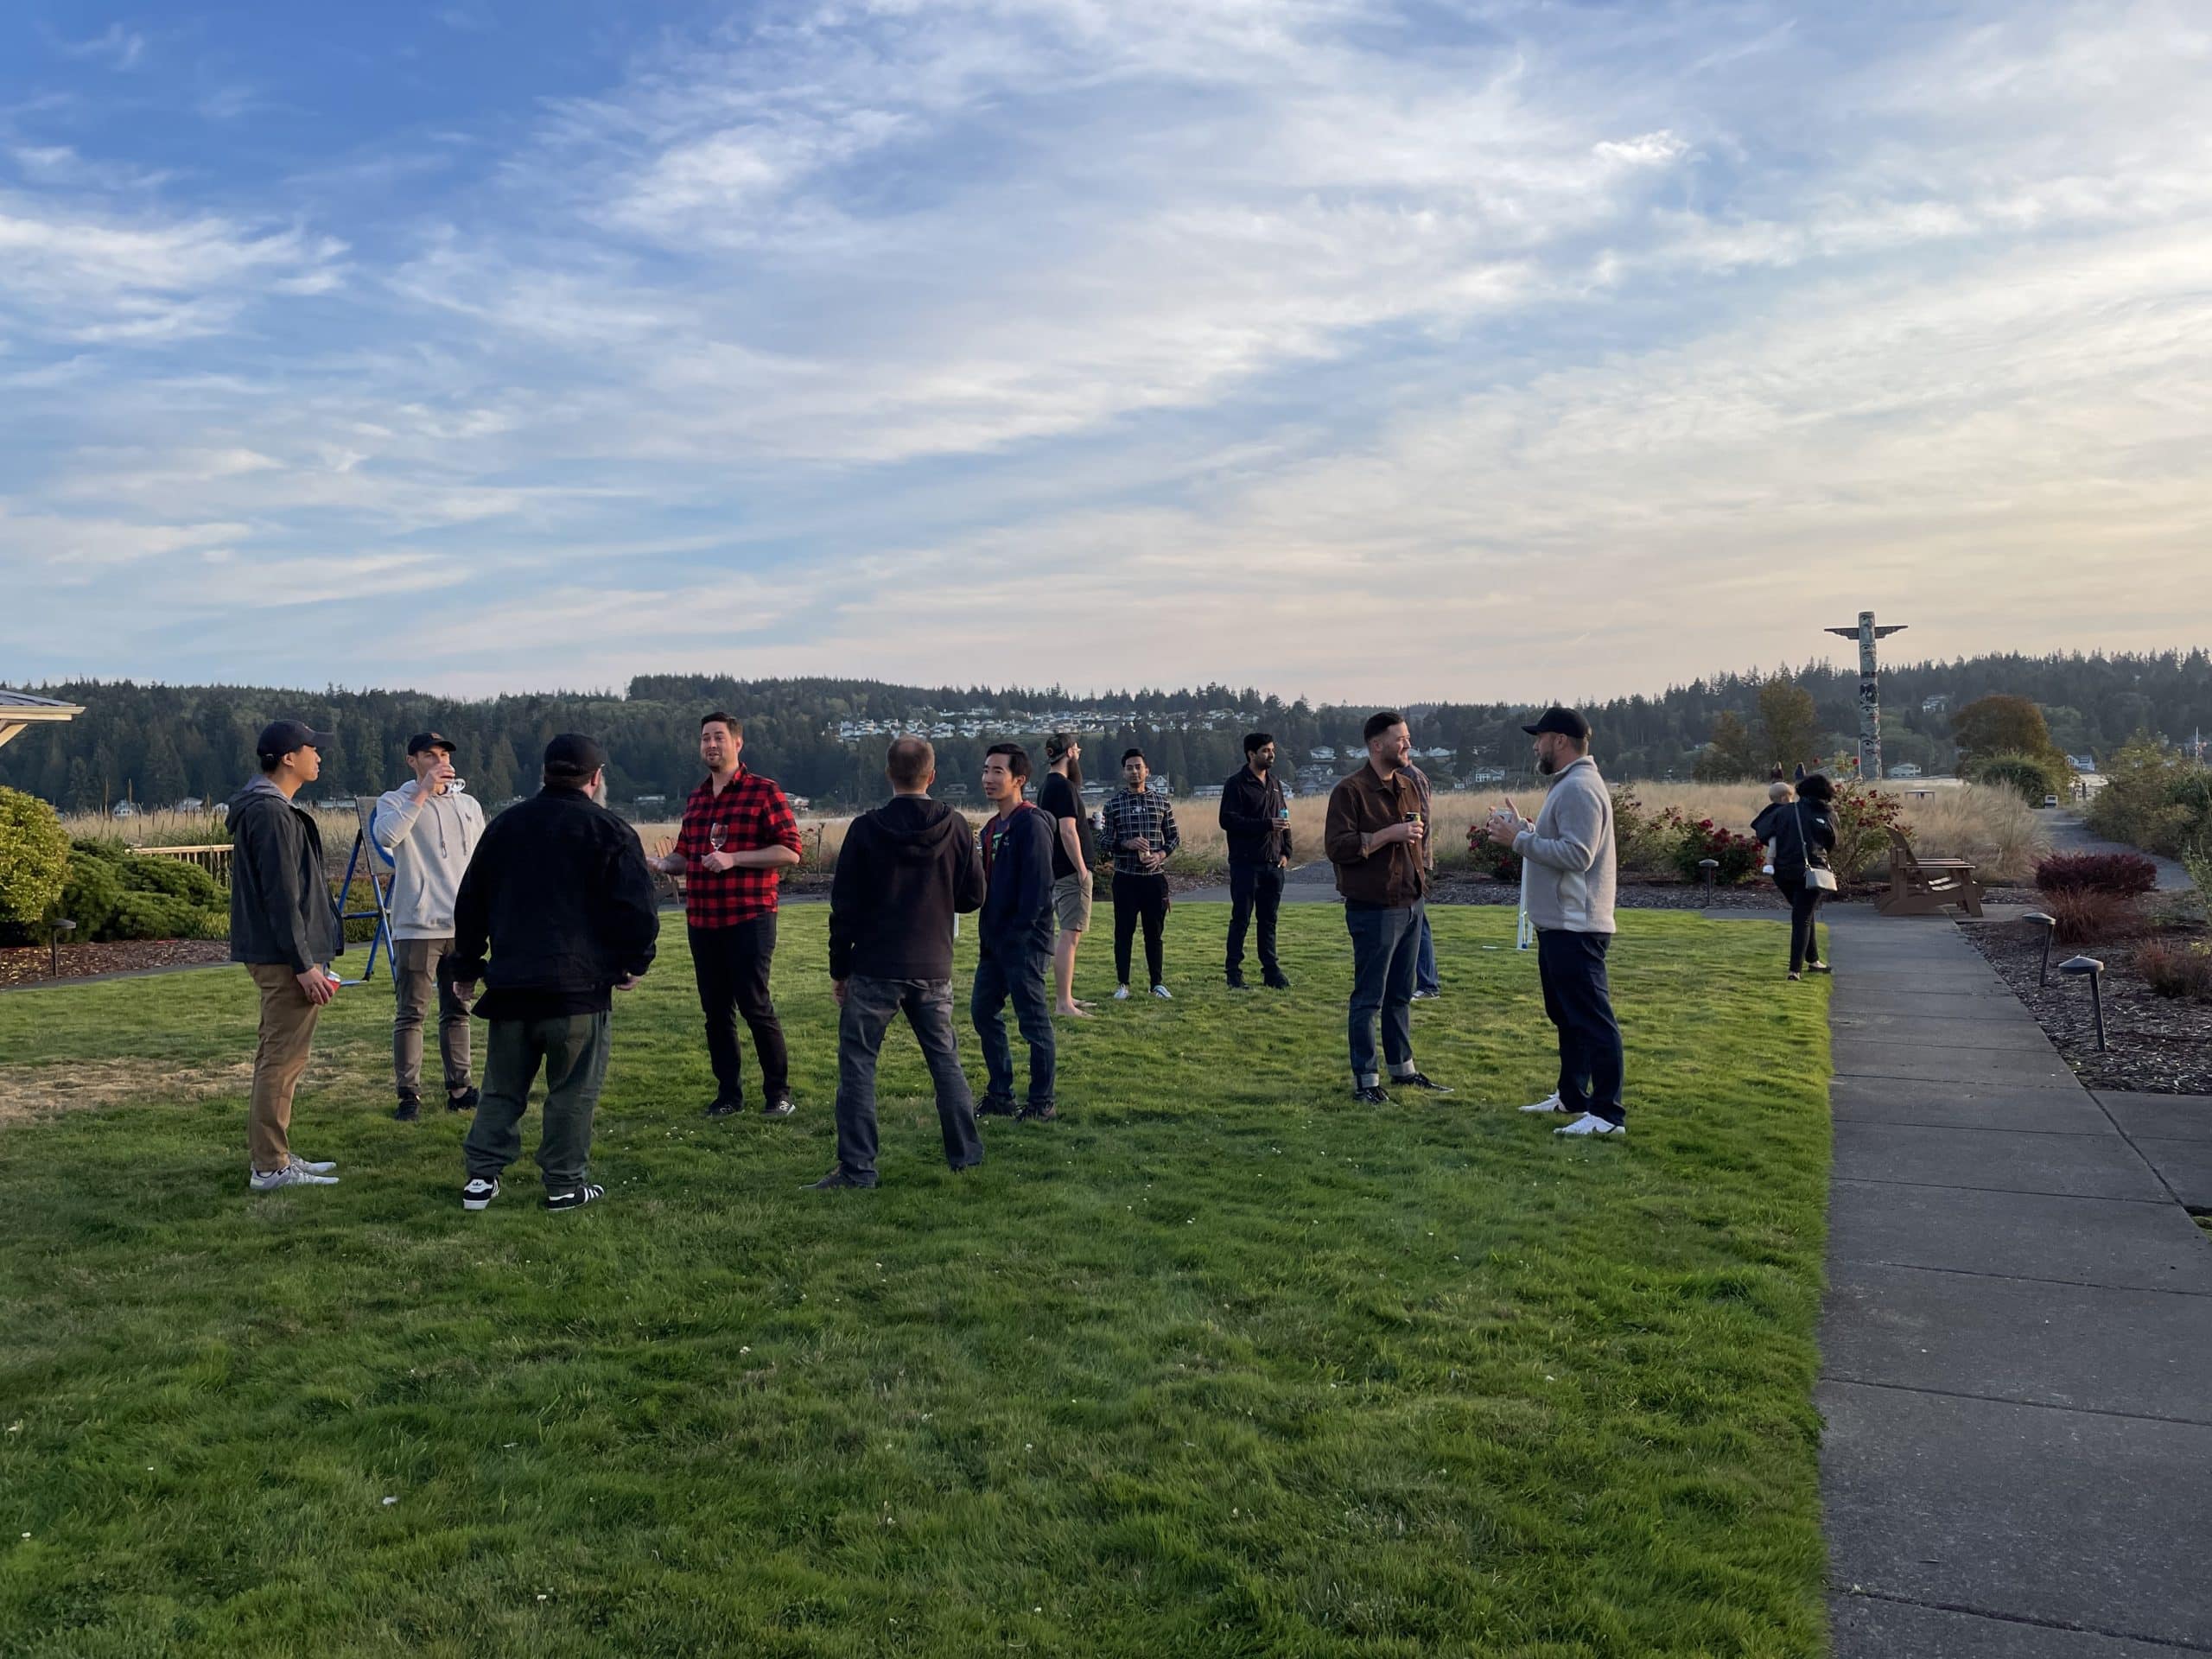 Employees enjoyed daily happy hours on the lawn at the 2022 TUNE retreat